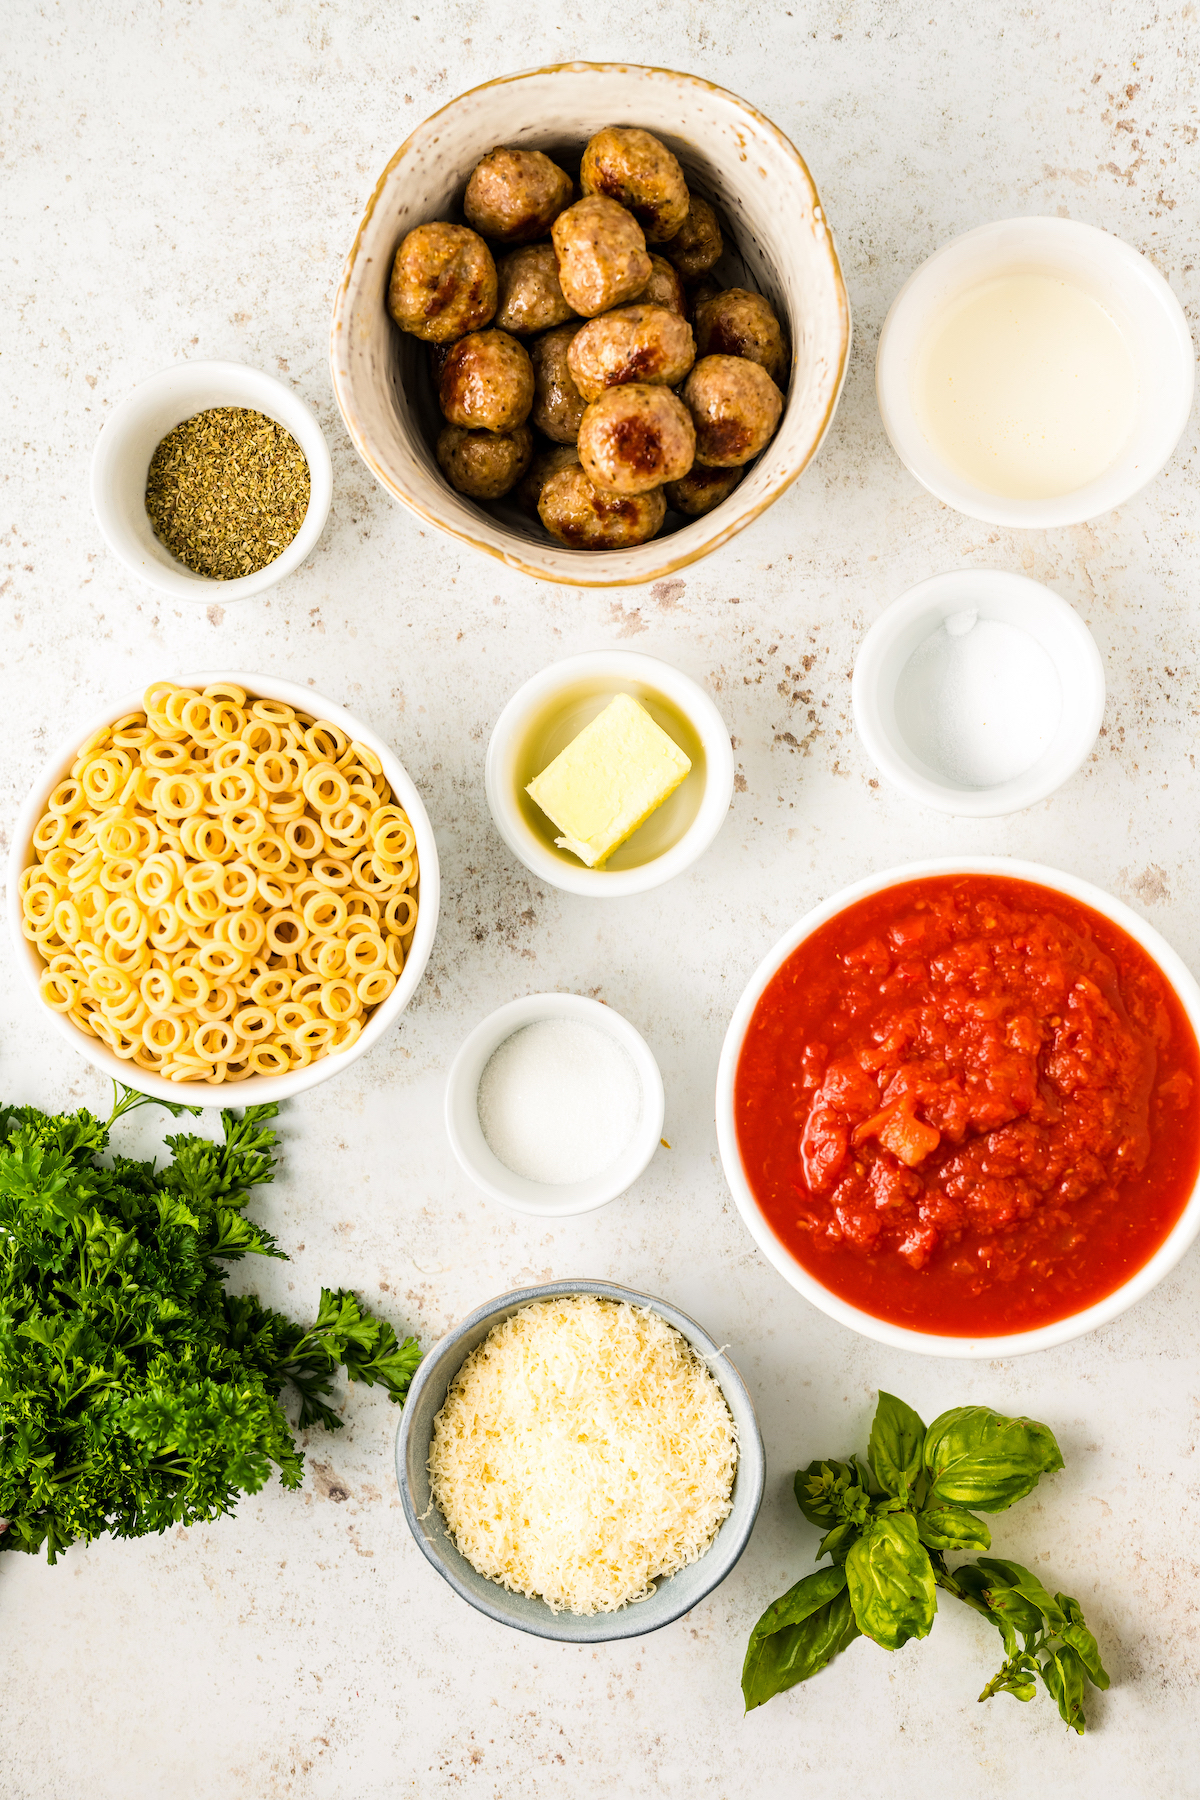 Ingredients for homemade spaghettiOs with meatballs.